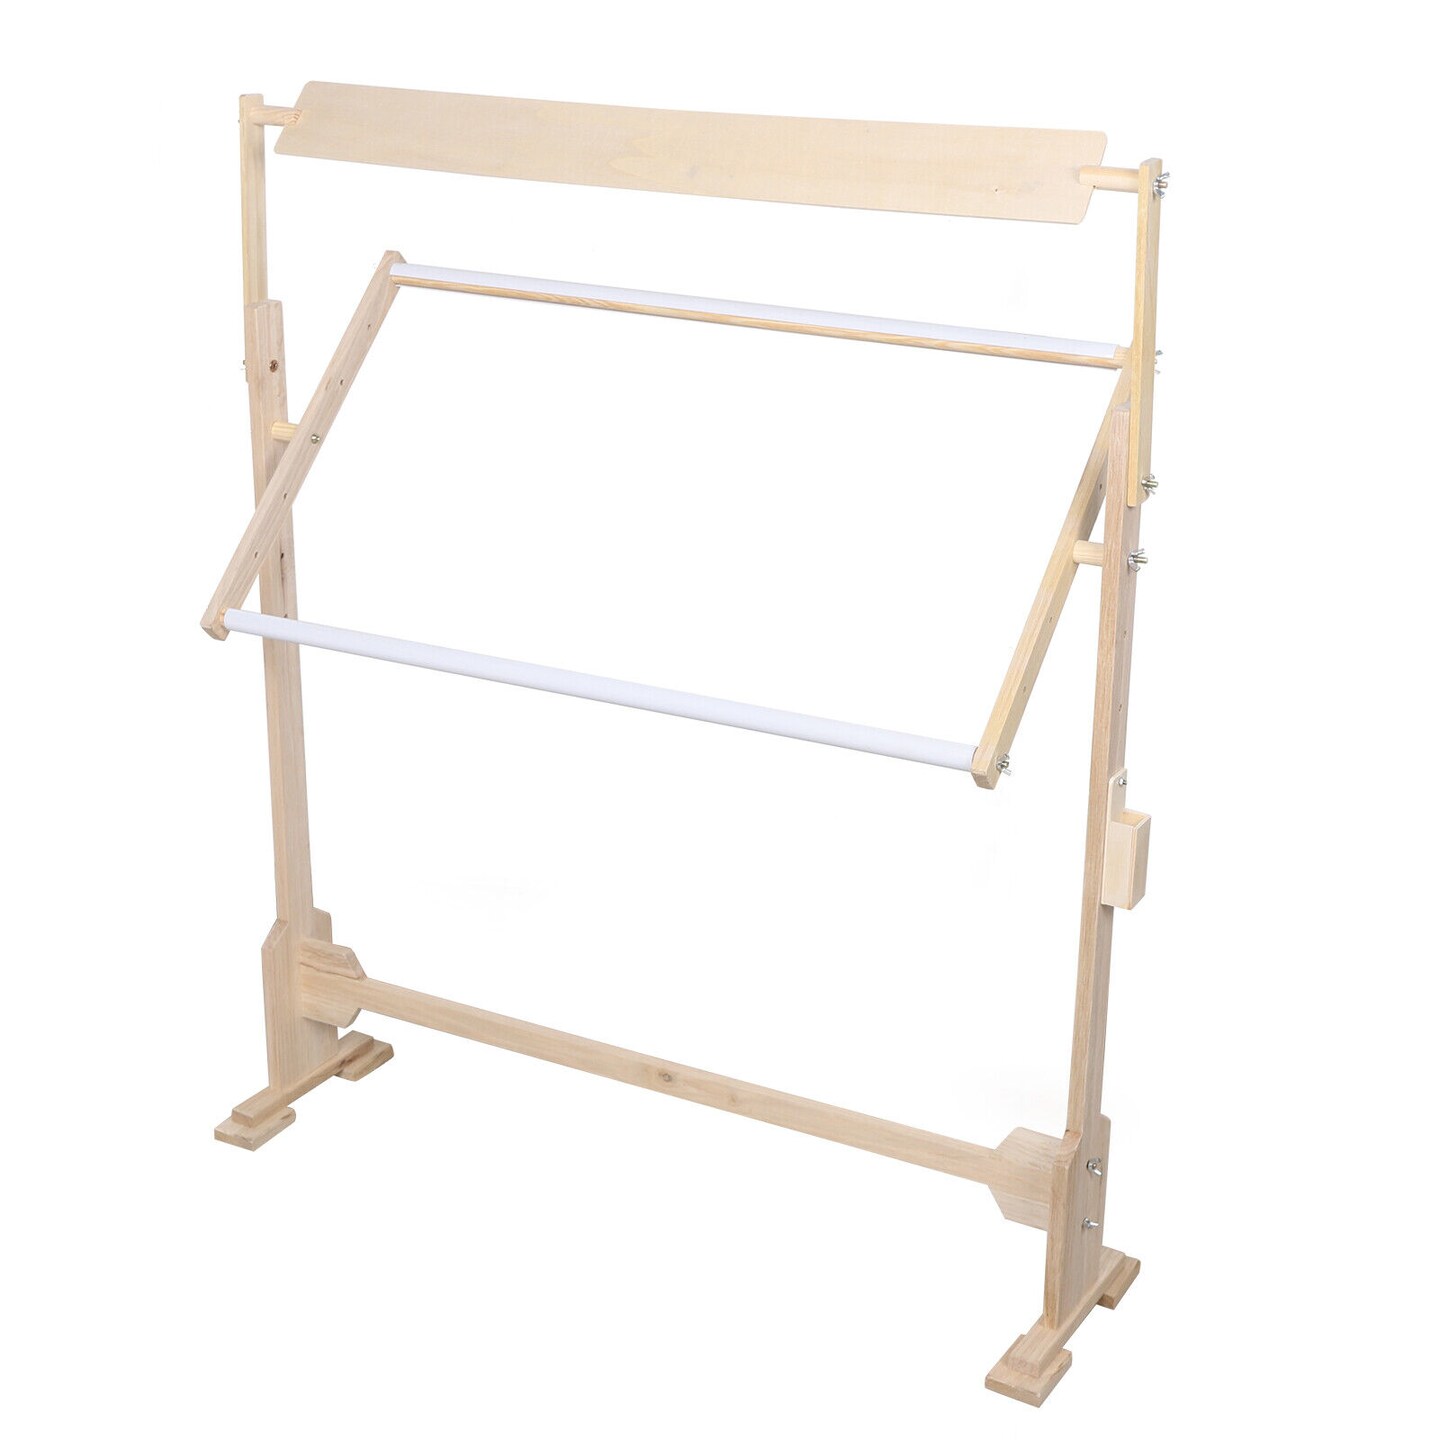 Kitcheniva Adjustable Embroidery Stand Wooden Frame